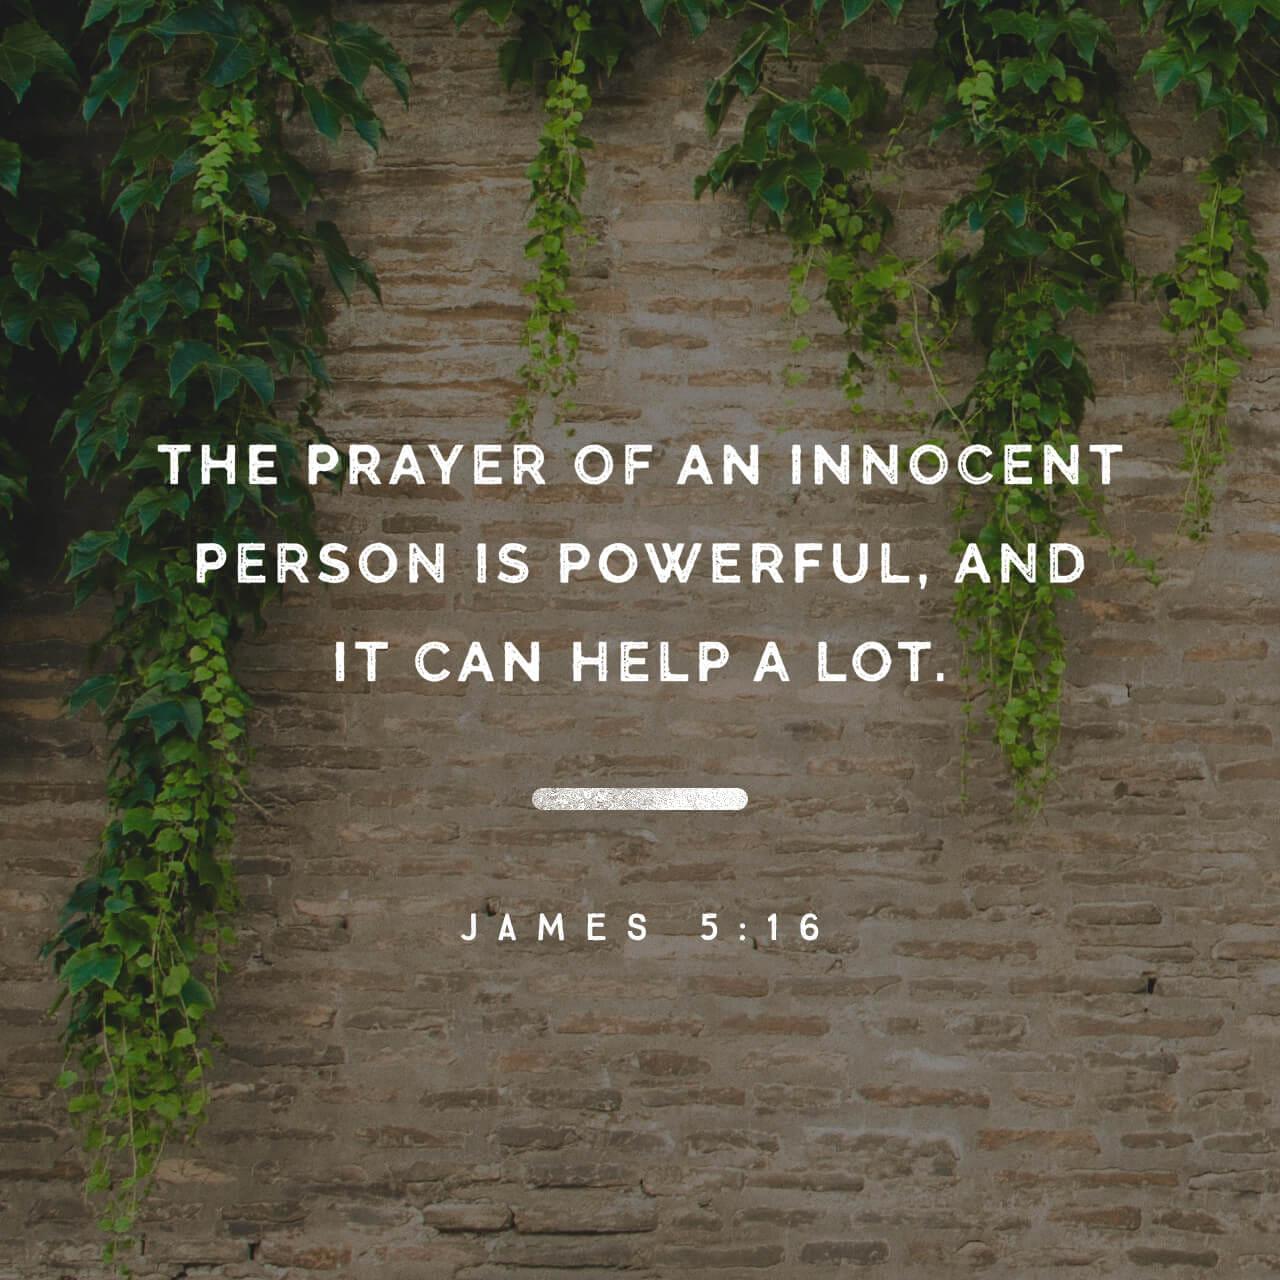 Bible Verse of the Day - day 89 - image 581 (James 5:13-20)